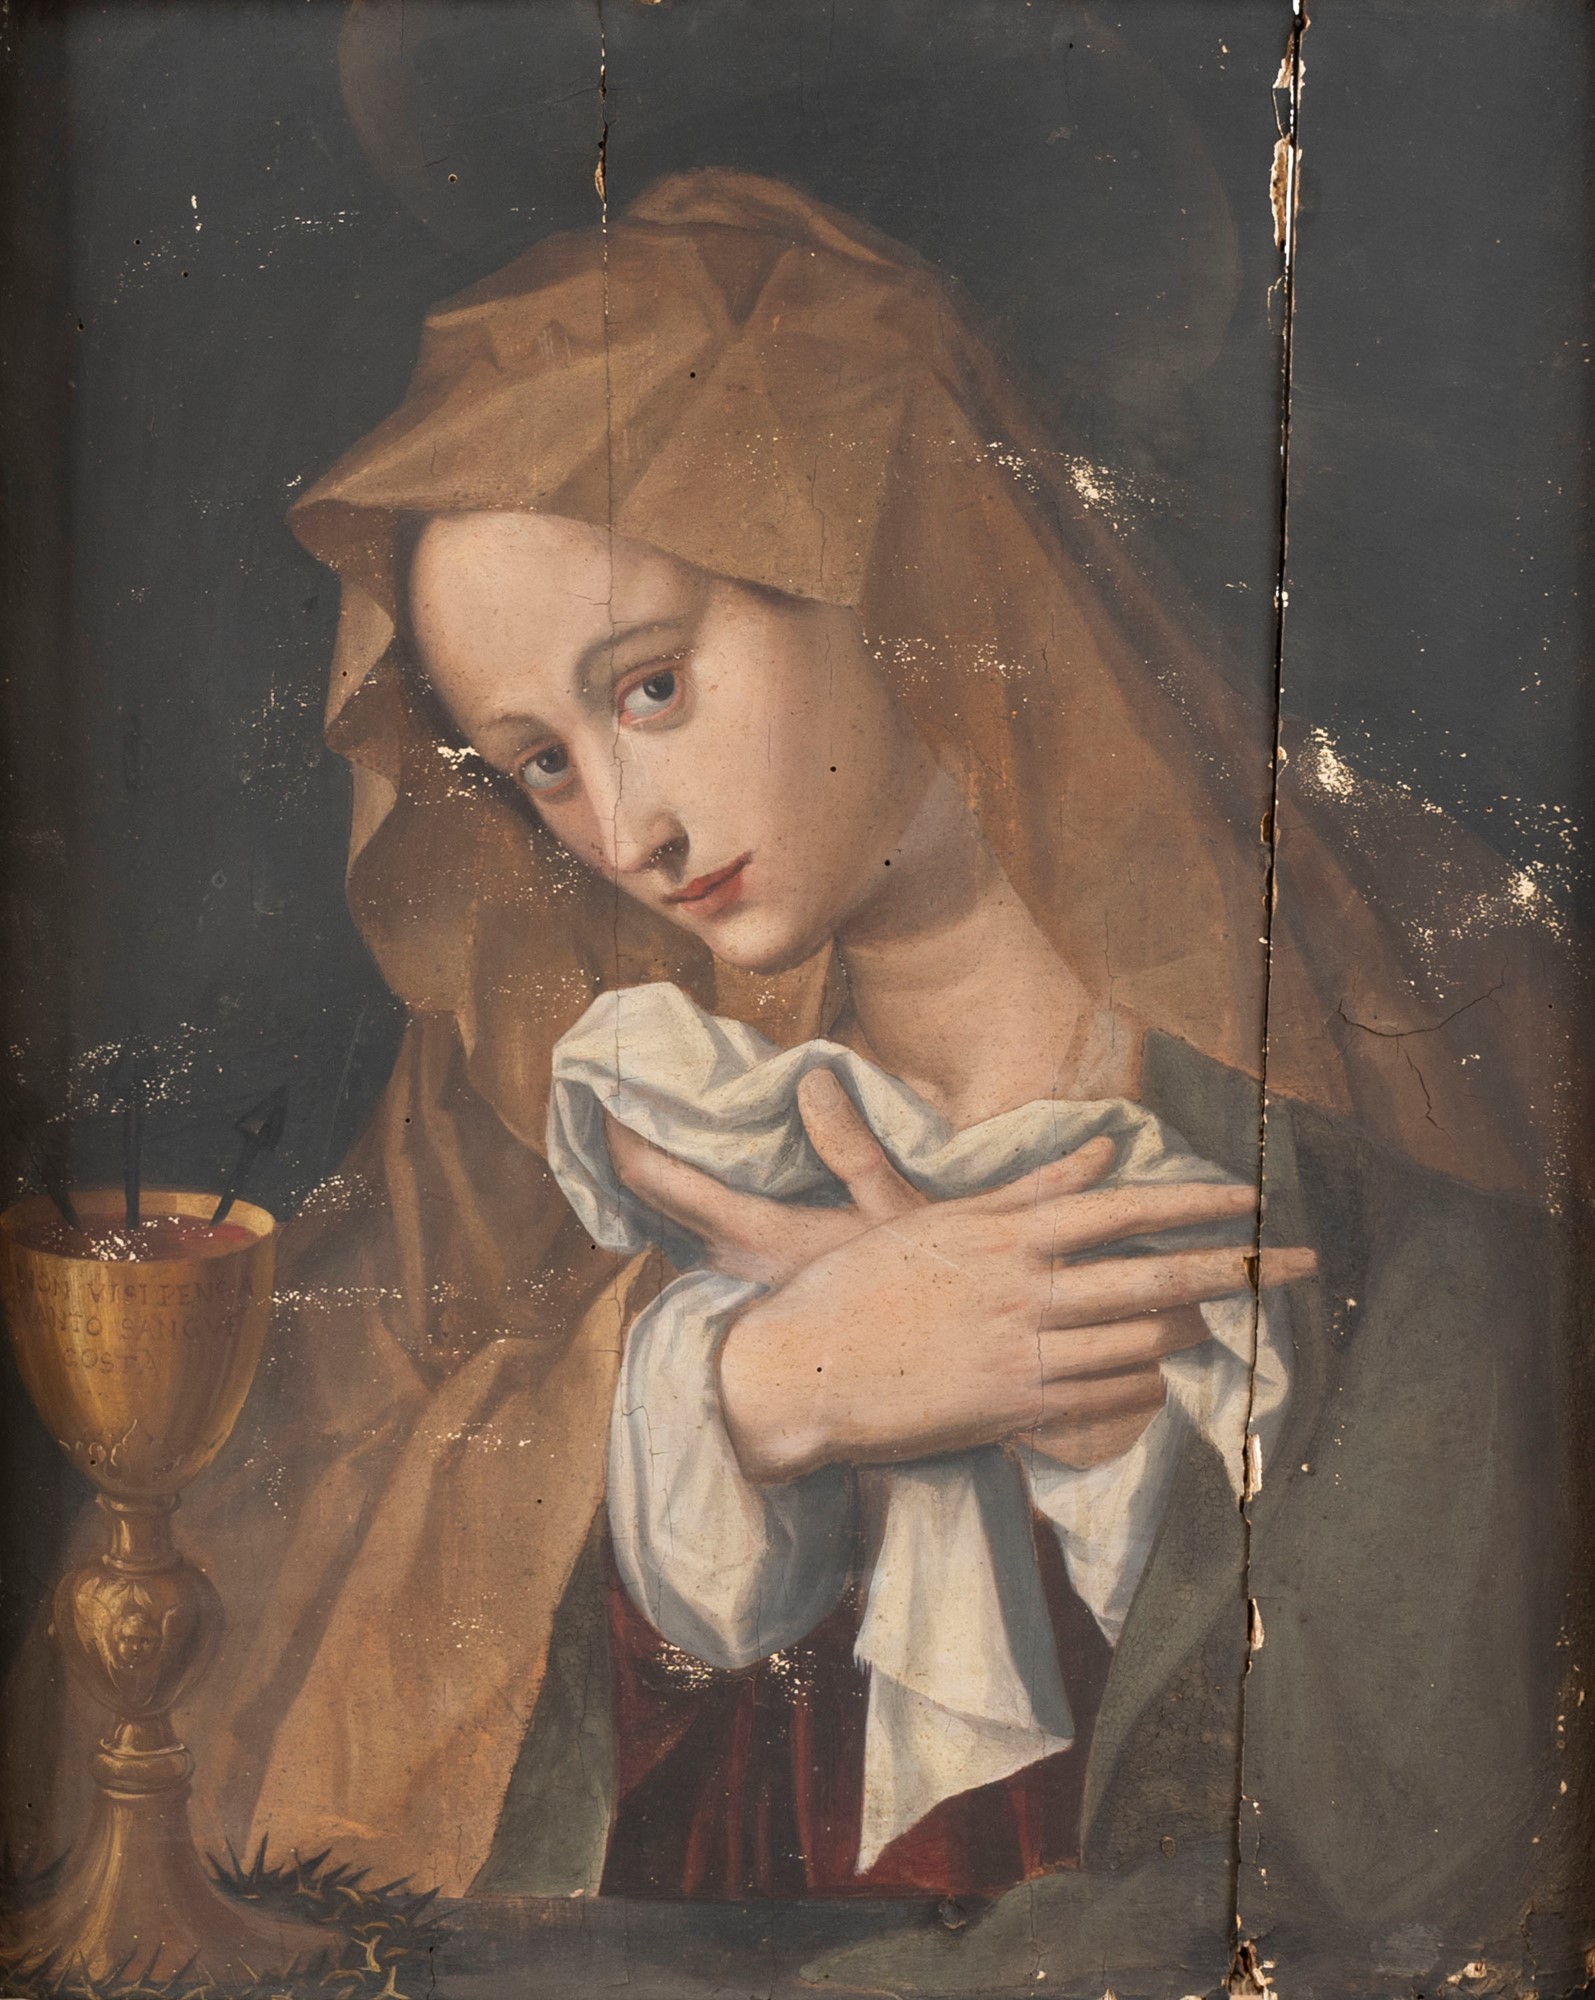 Tuscan School, late sixteenth century - early seventeenth century - Madonna praying with the cup of